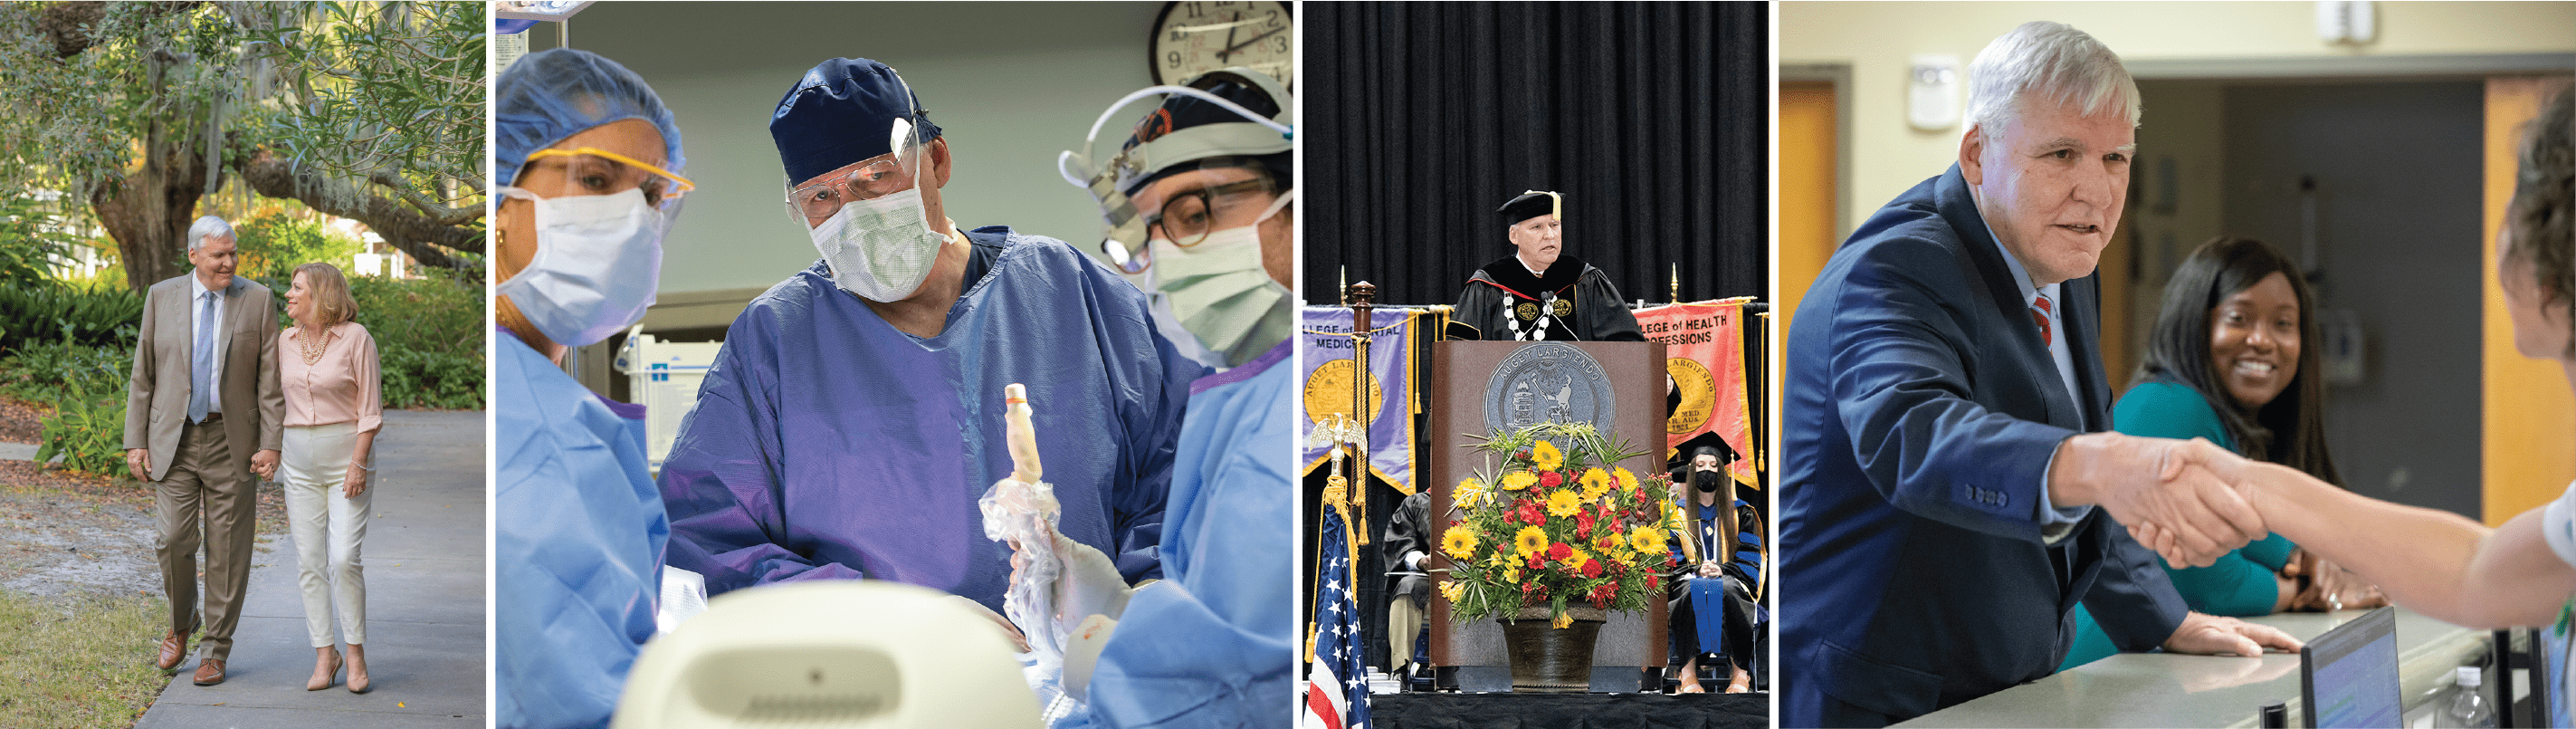 Collage of Dr. Cole with wife Kathy, in surgery, at graduation and greeting employes